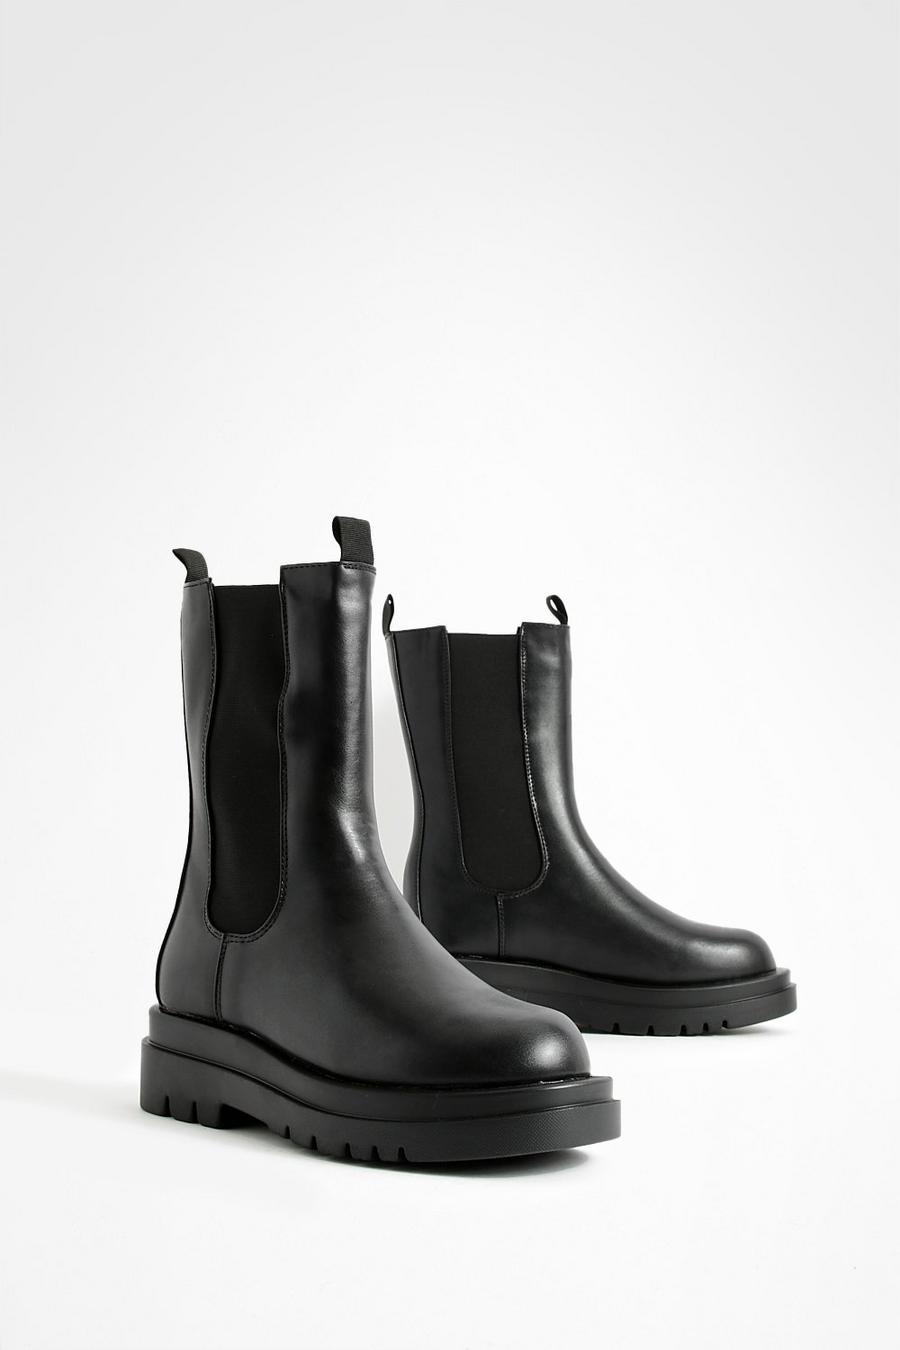 Black schwarz Chunky Cleated Calf High Chelsea Boots